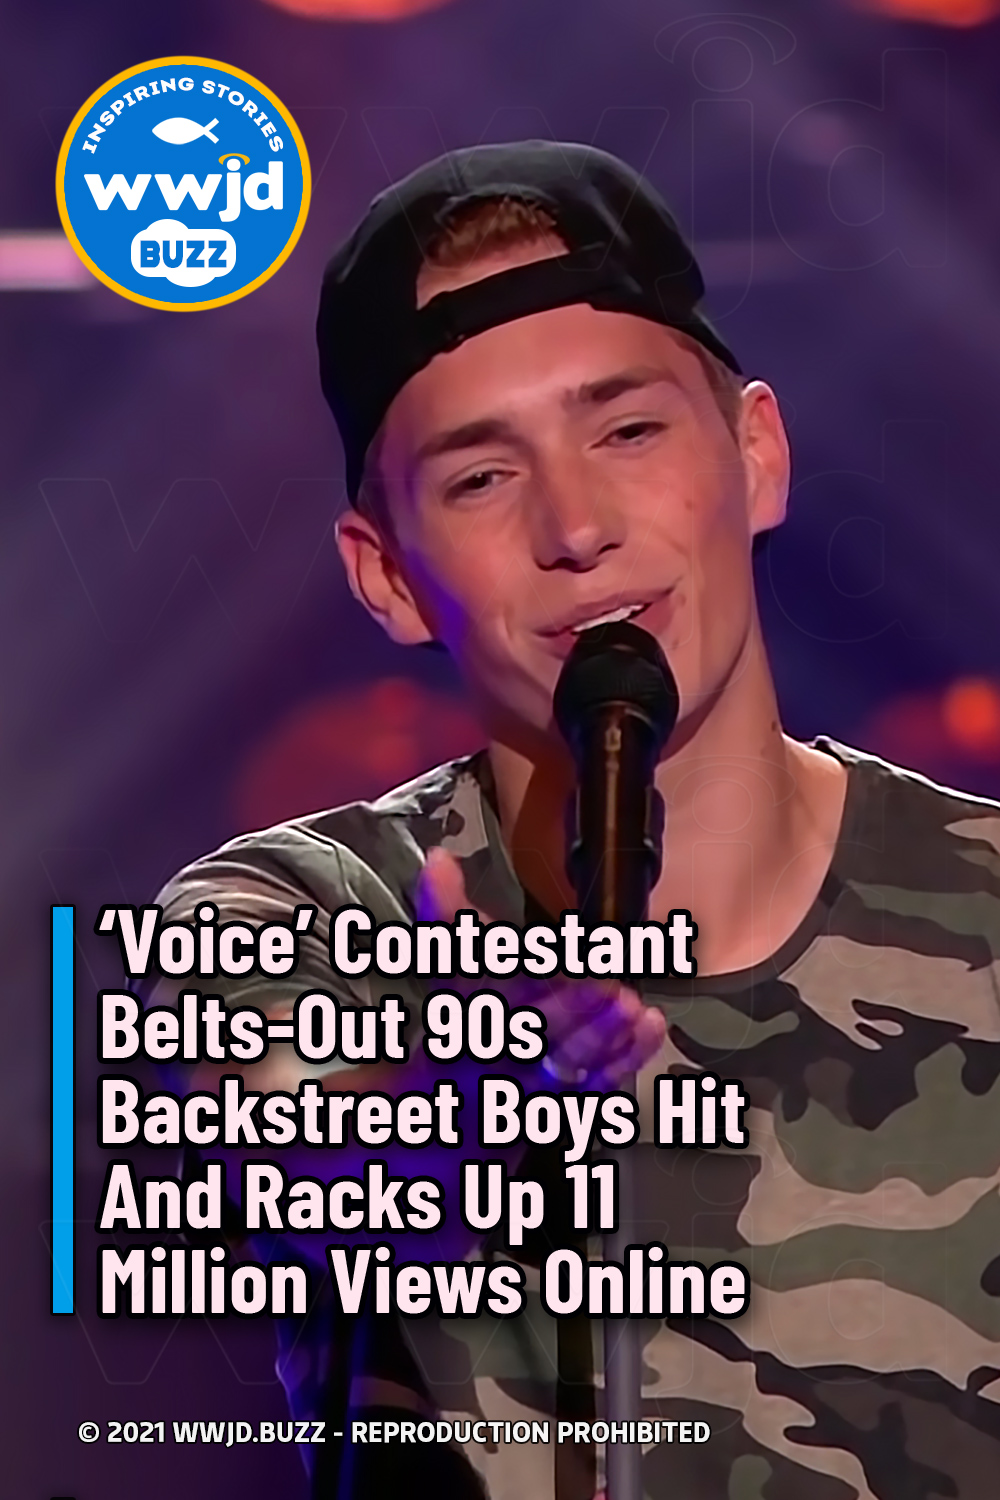 ‘Voice’ Contestant Belts-Out 90s Backstreet Boys Hit And Racks Up 11 Million Views Online